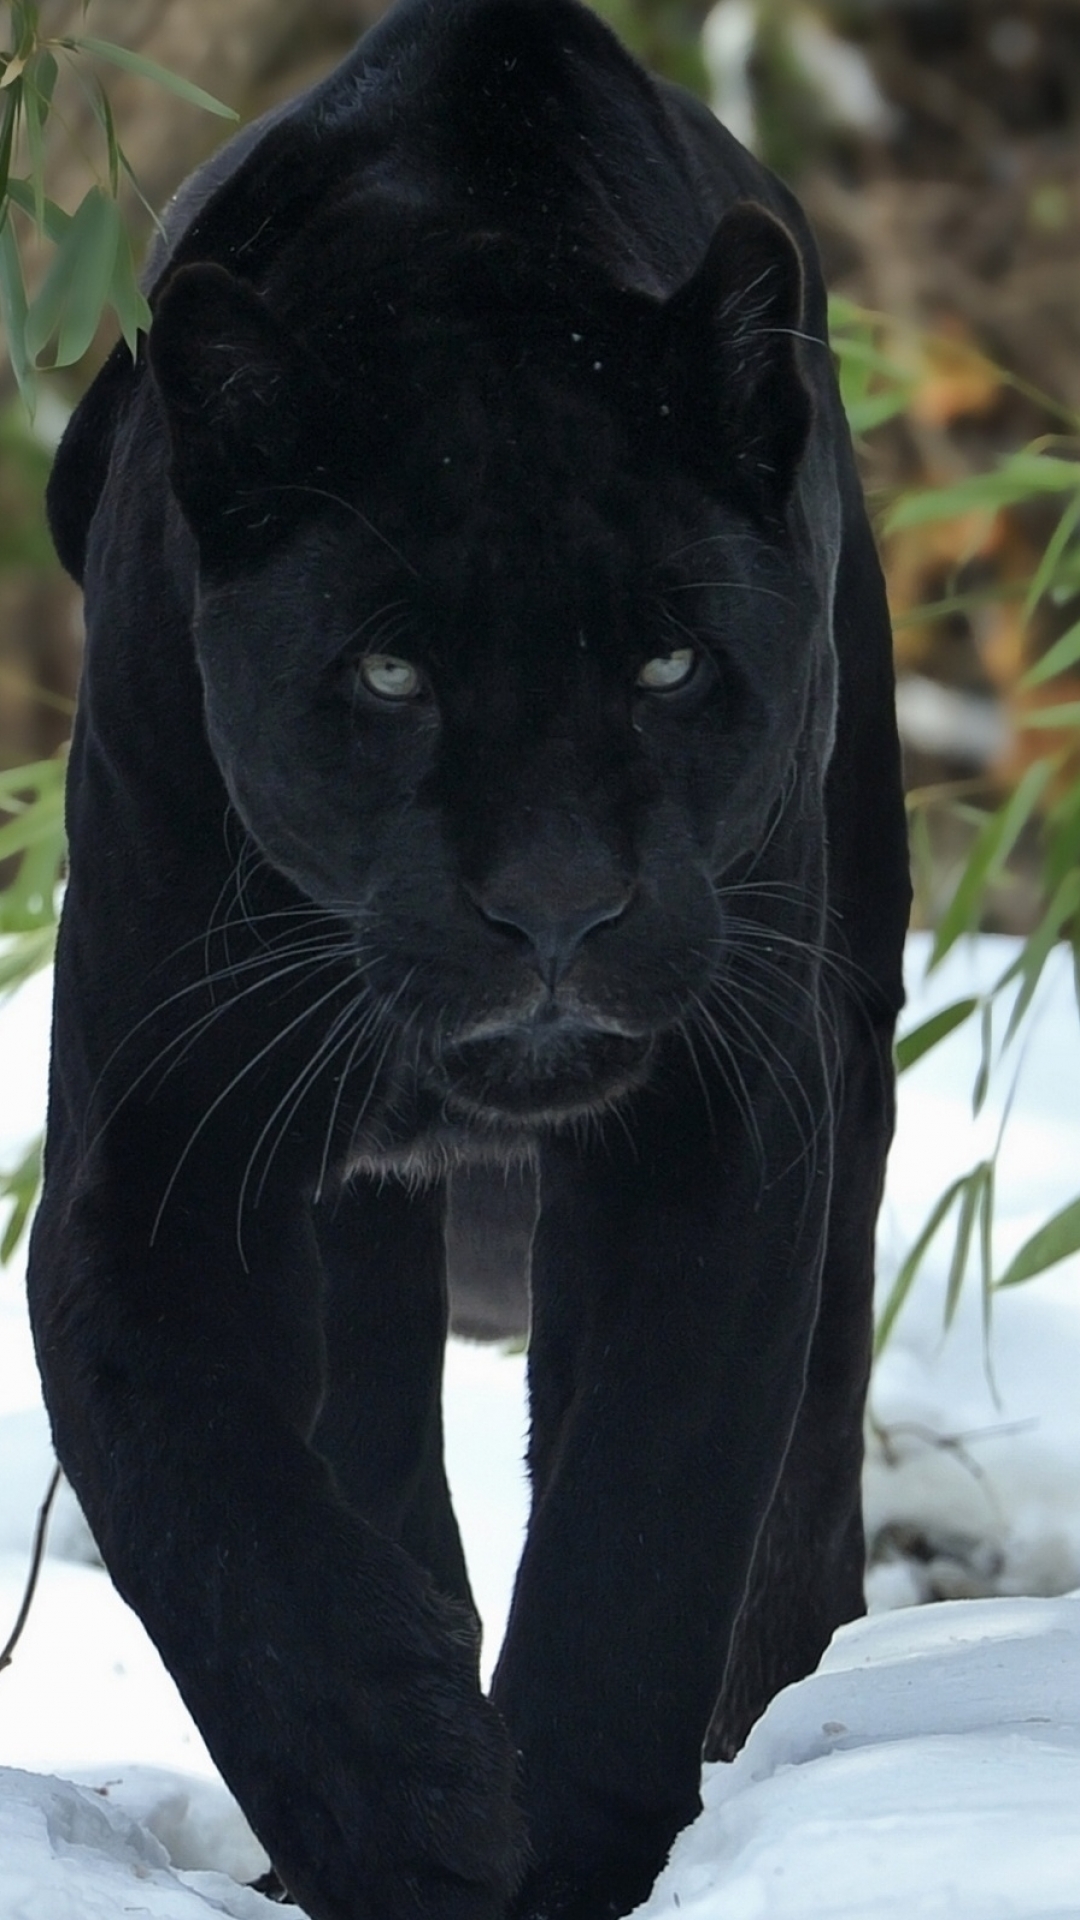 AnimalBlack Panther 1080x1920 Wallpaper ID 428442   Mobile Abyss